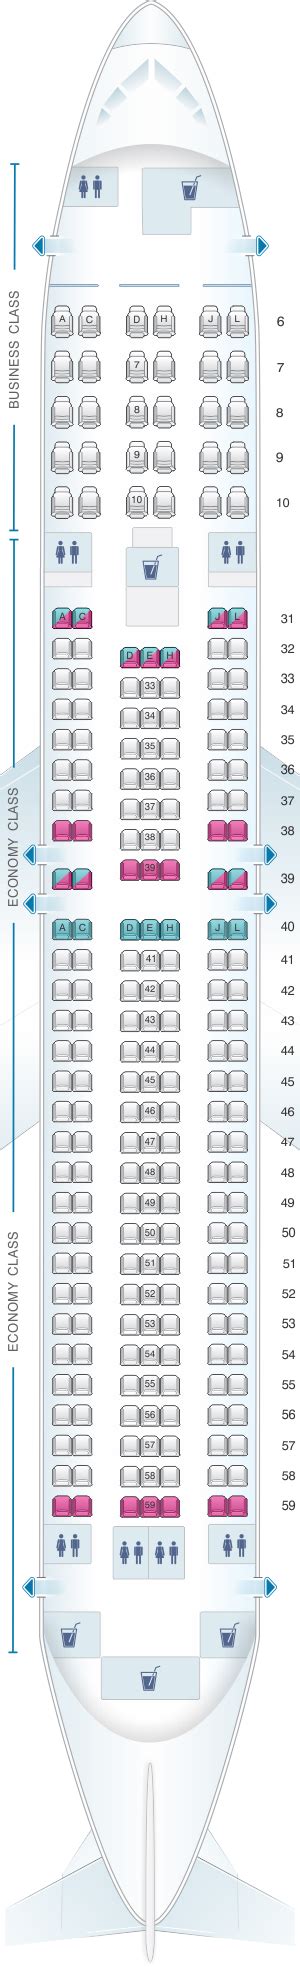 China Eastern Airlines Seat Map Elcho Table